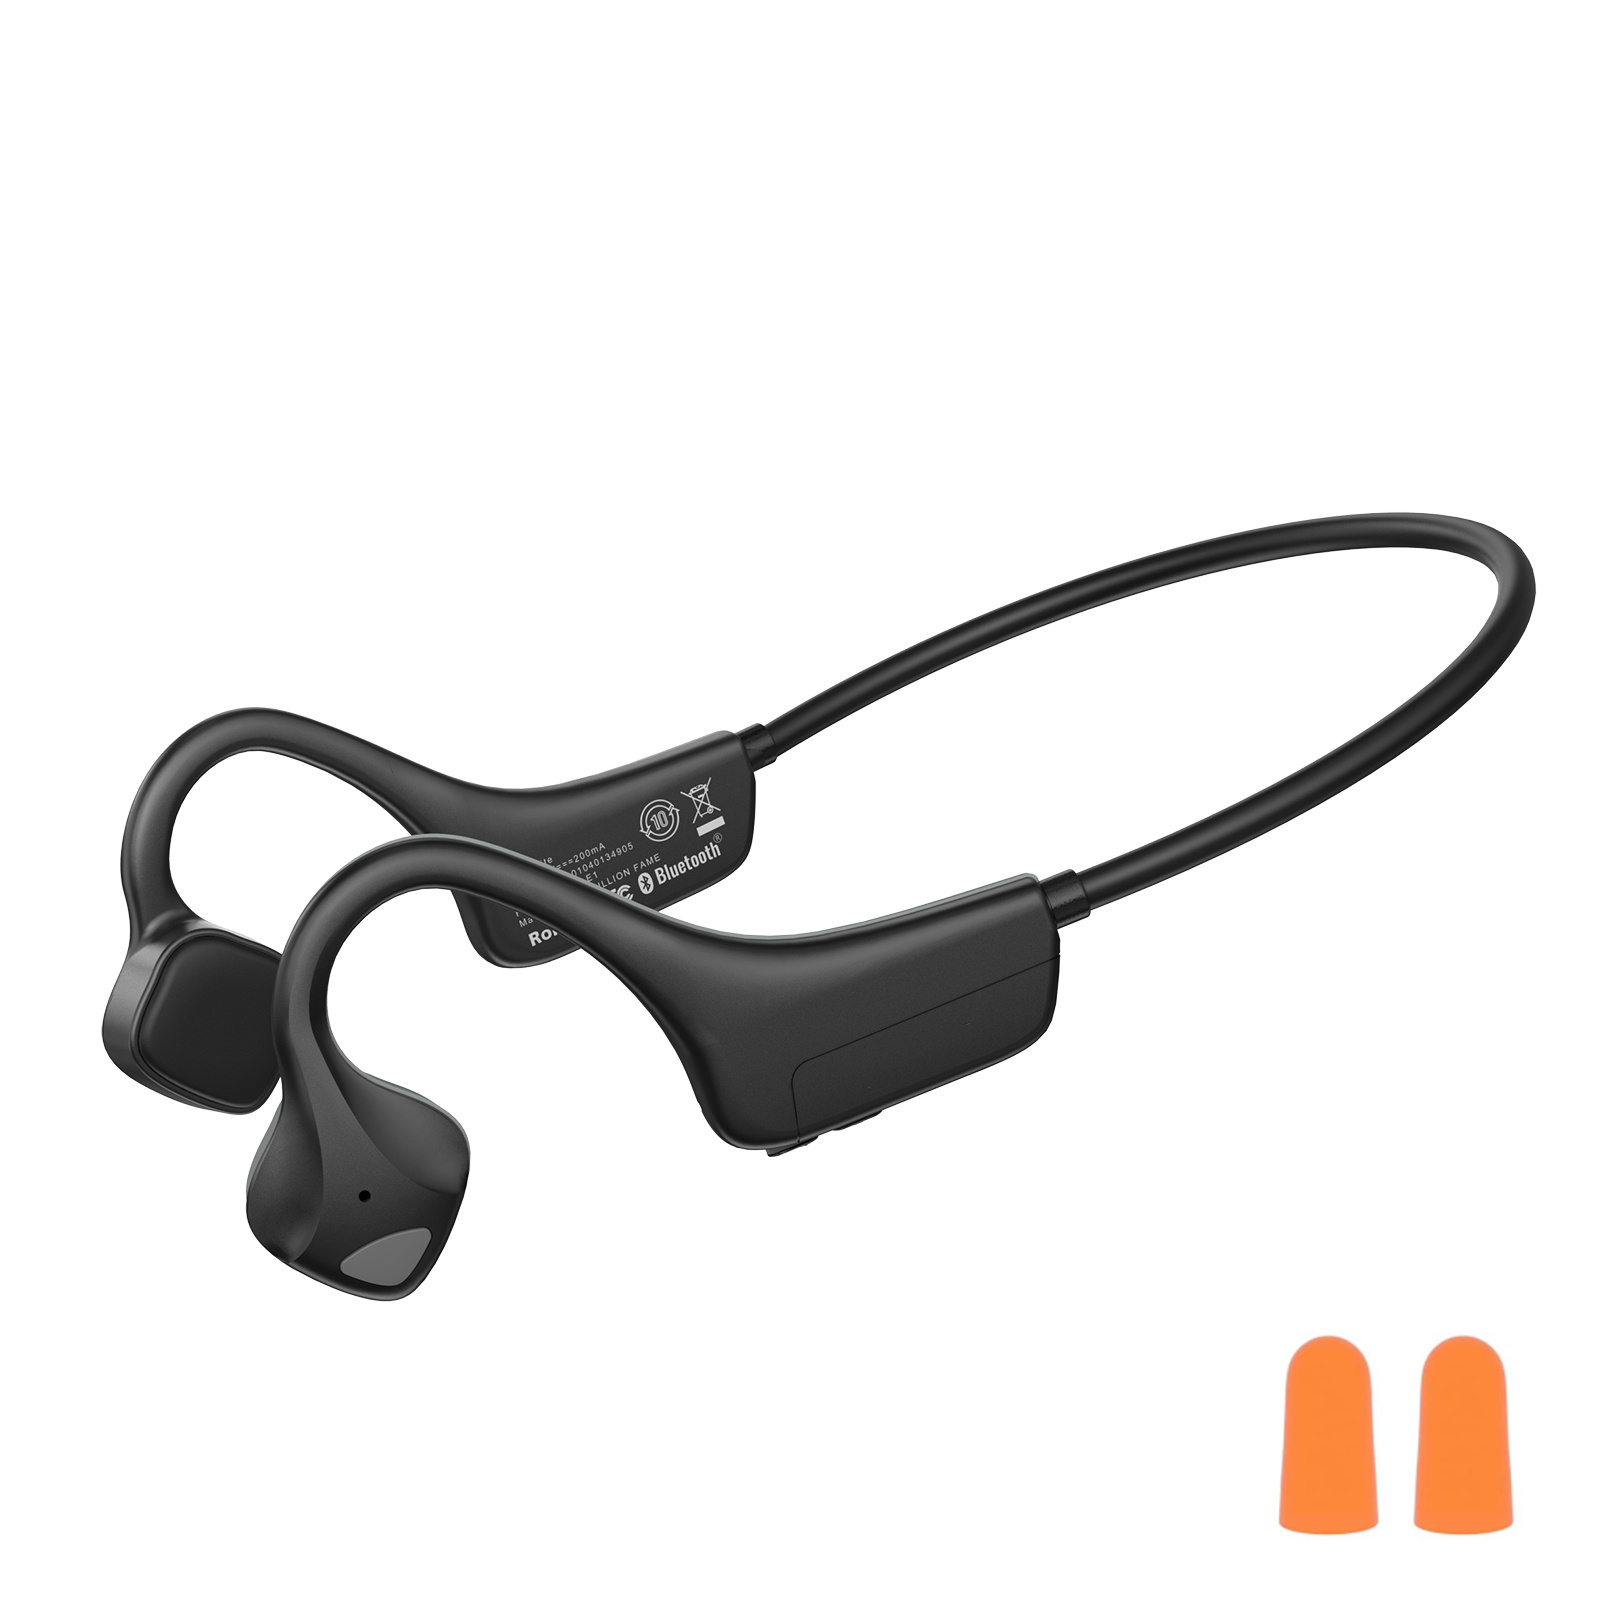 Bone Conduction Headphones with Noise Reduction Tech, 9 Digital N1 Open Ear Headphones with MIC, Waterproof Wireless Bluetooth 5.0 Sport Headset for Running, Bicycling, Hiking, Yoga -Black